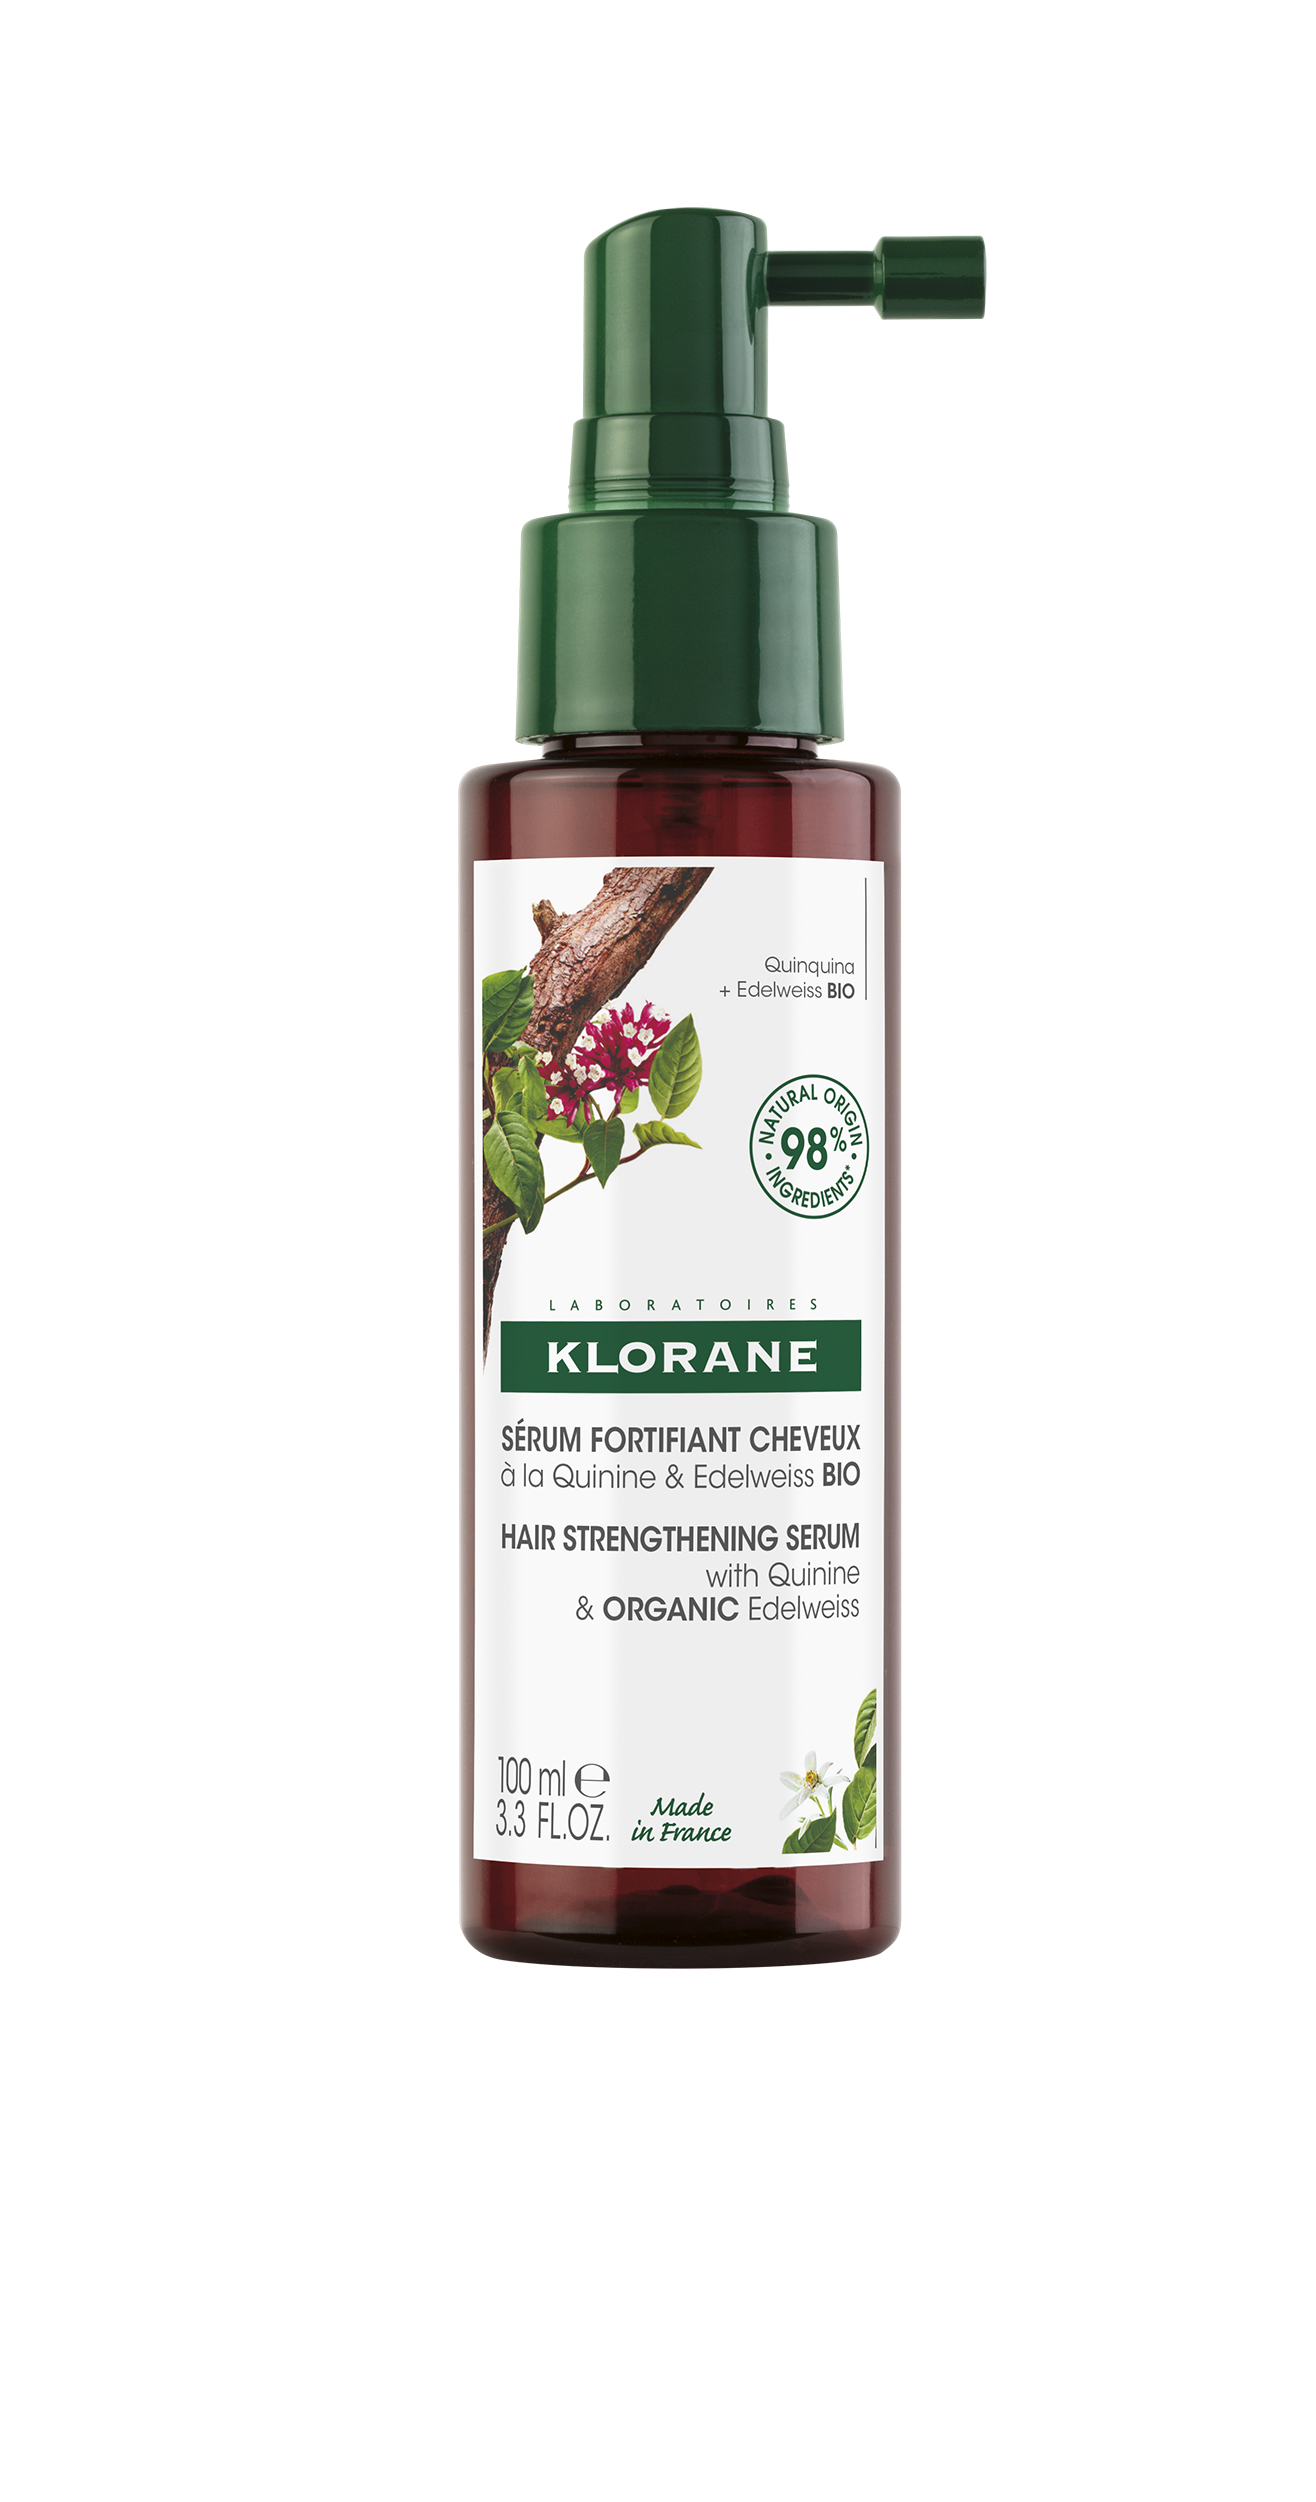 Klorane Launches NEW Hair Strengthening Serum and Keratin Capsules to  maintain the appearance of full, strong & healthy hair - Hi 